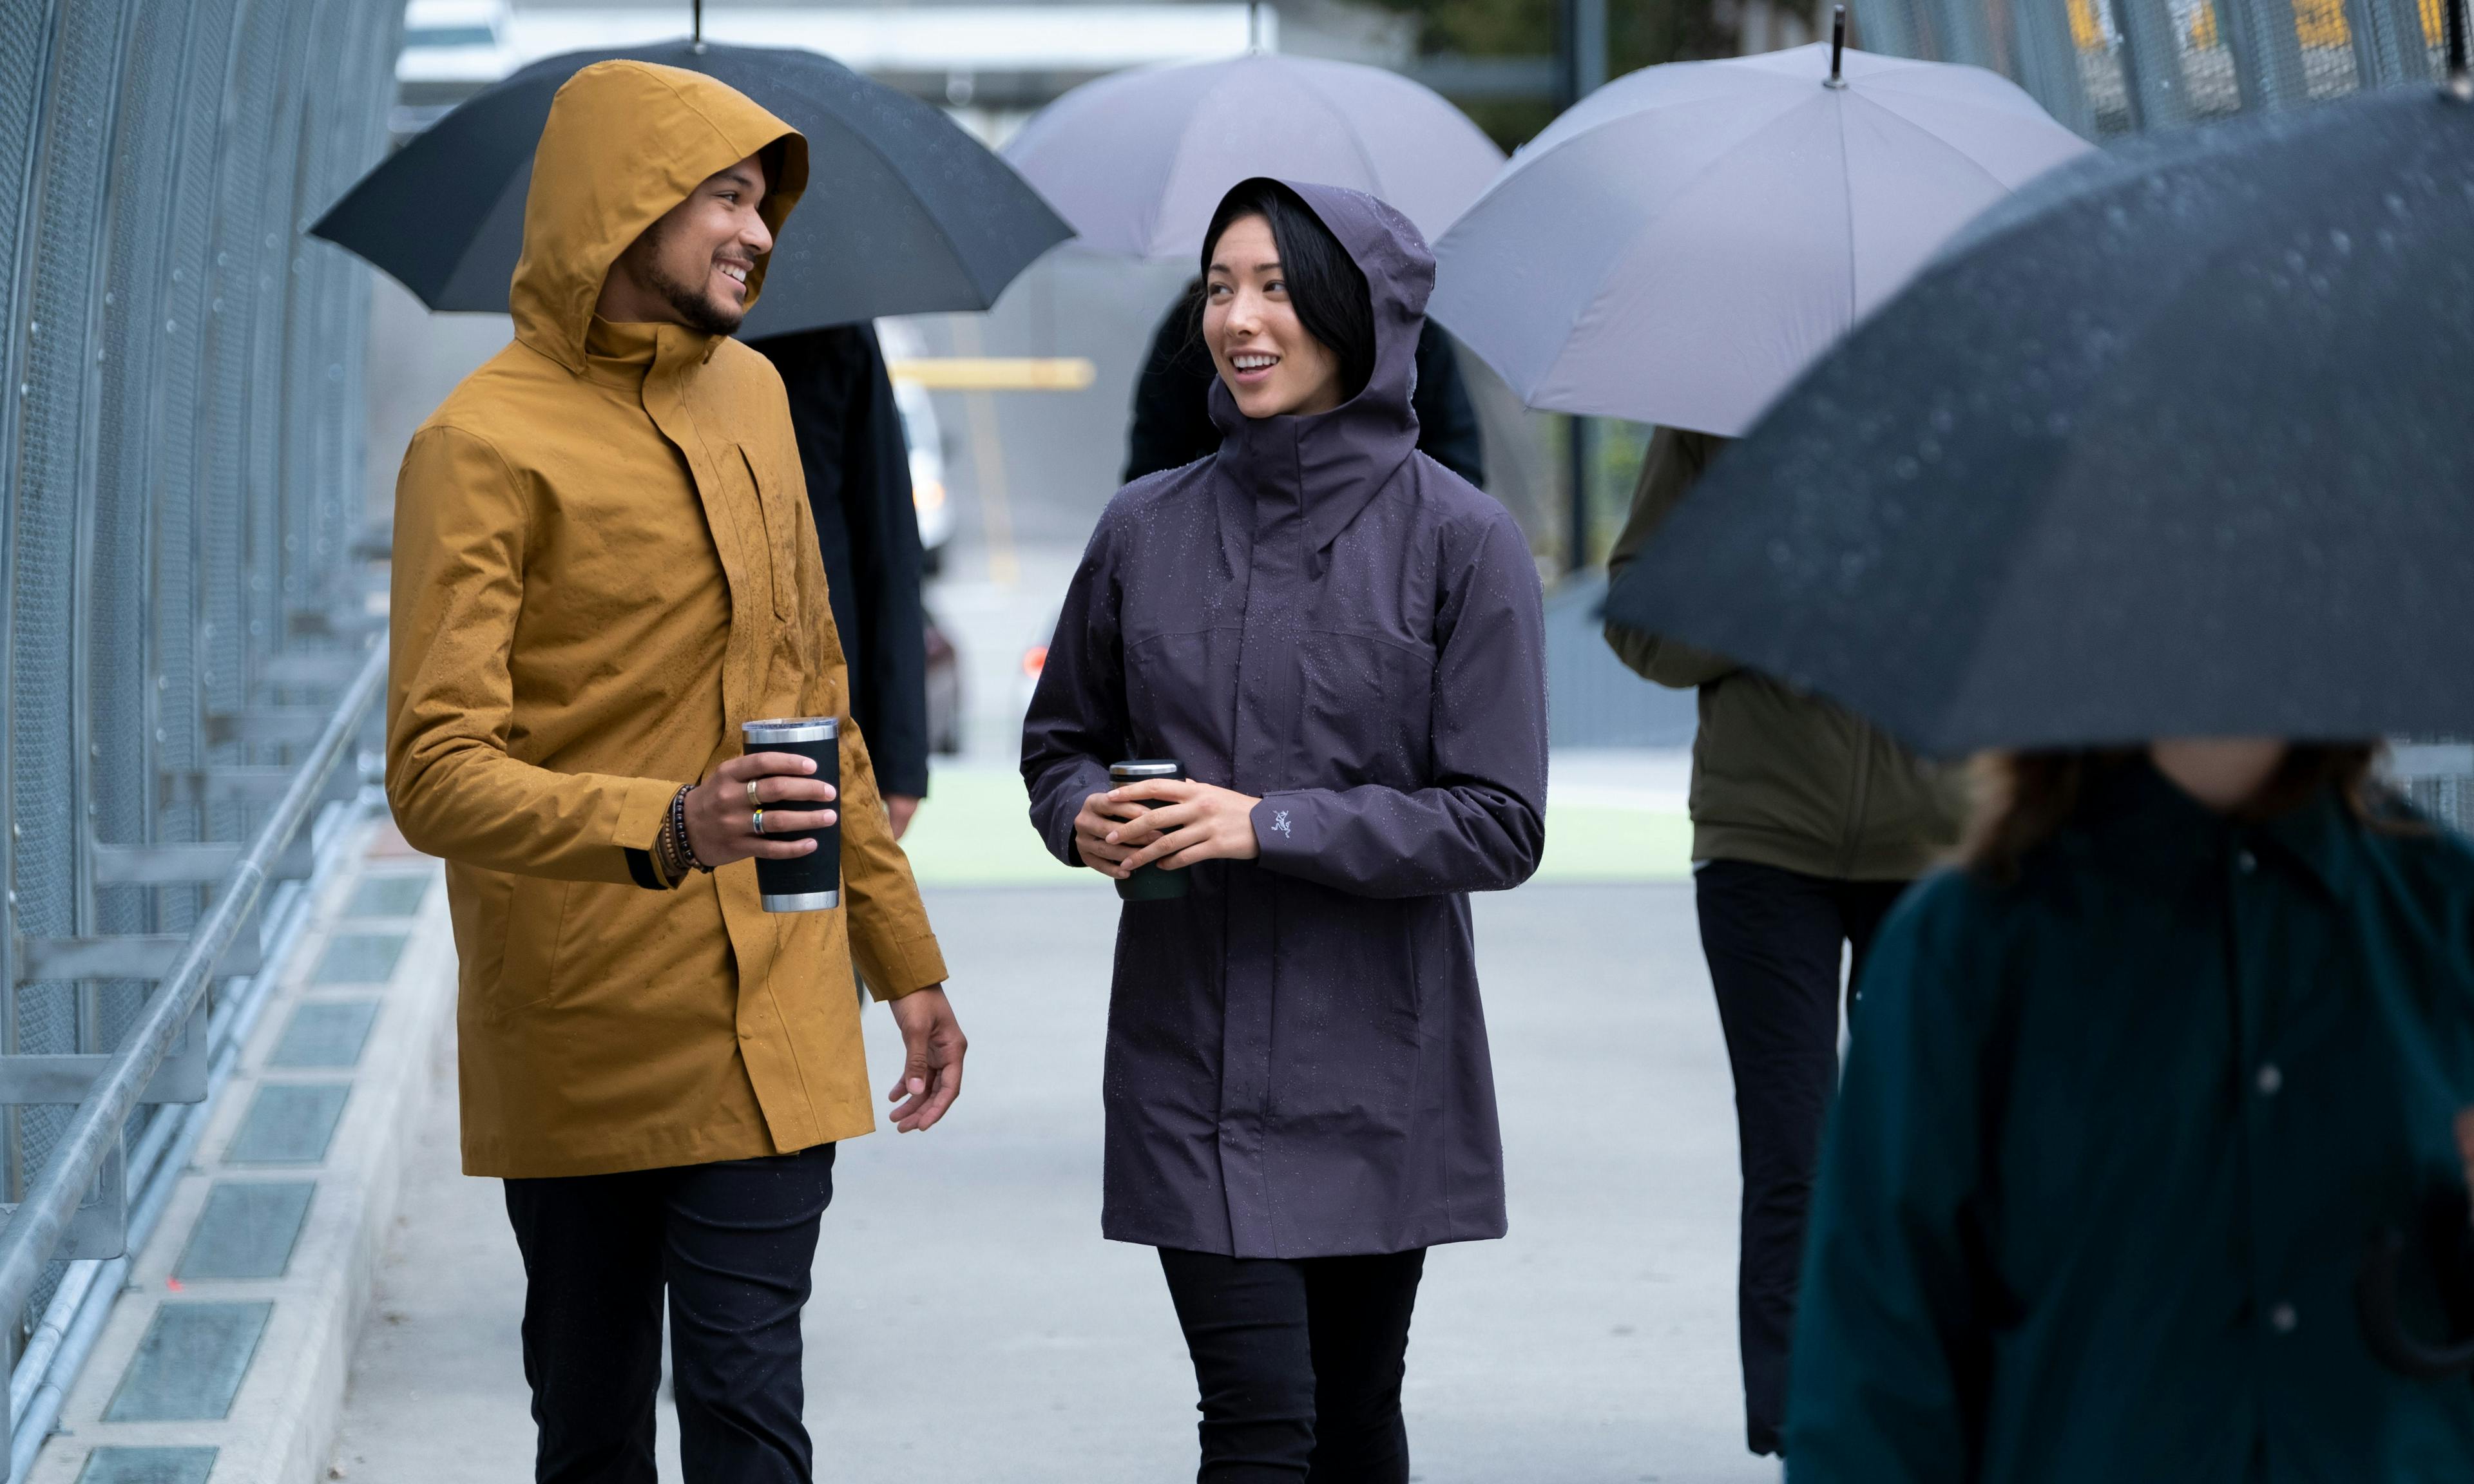 Two people walking on a rainy day wearing jackets to stay dry, while everyone around them is using umbrellas